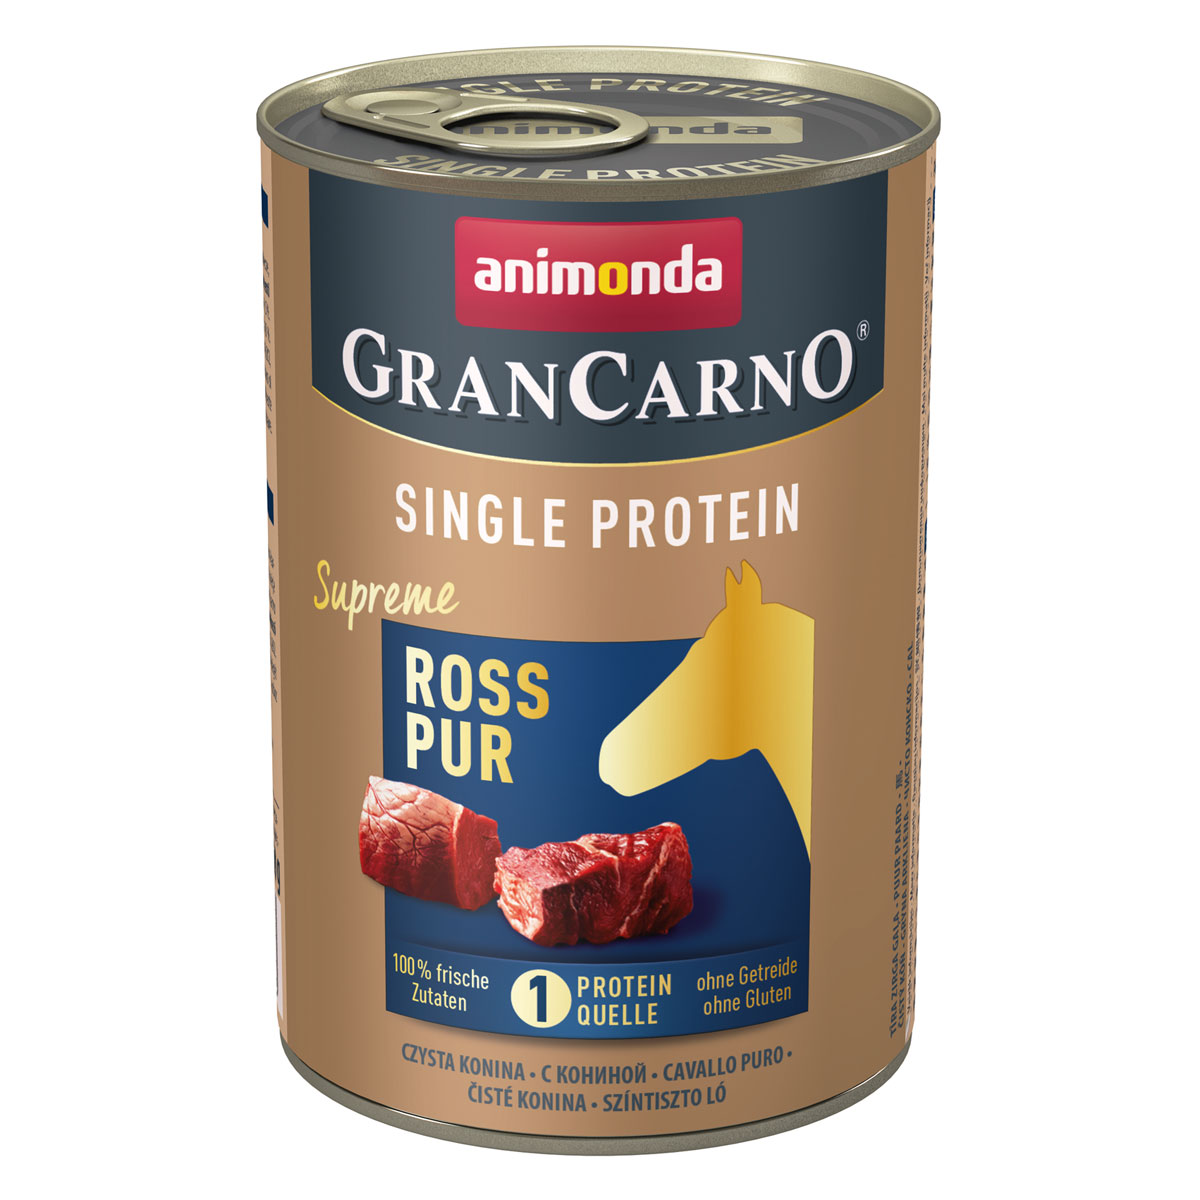 Adult Ross pur 400g